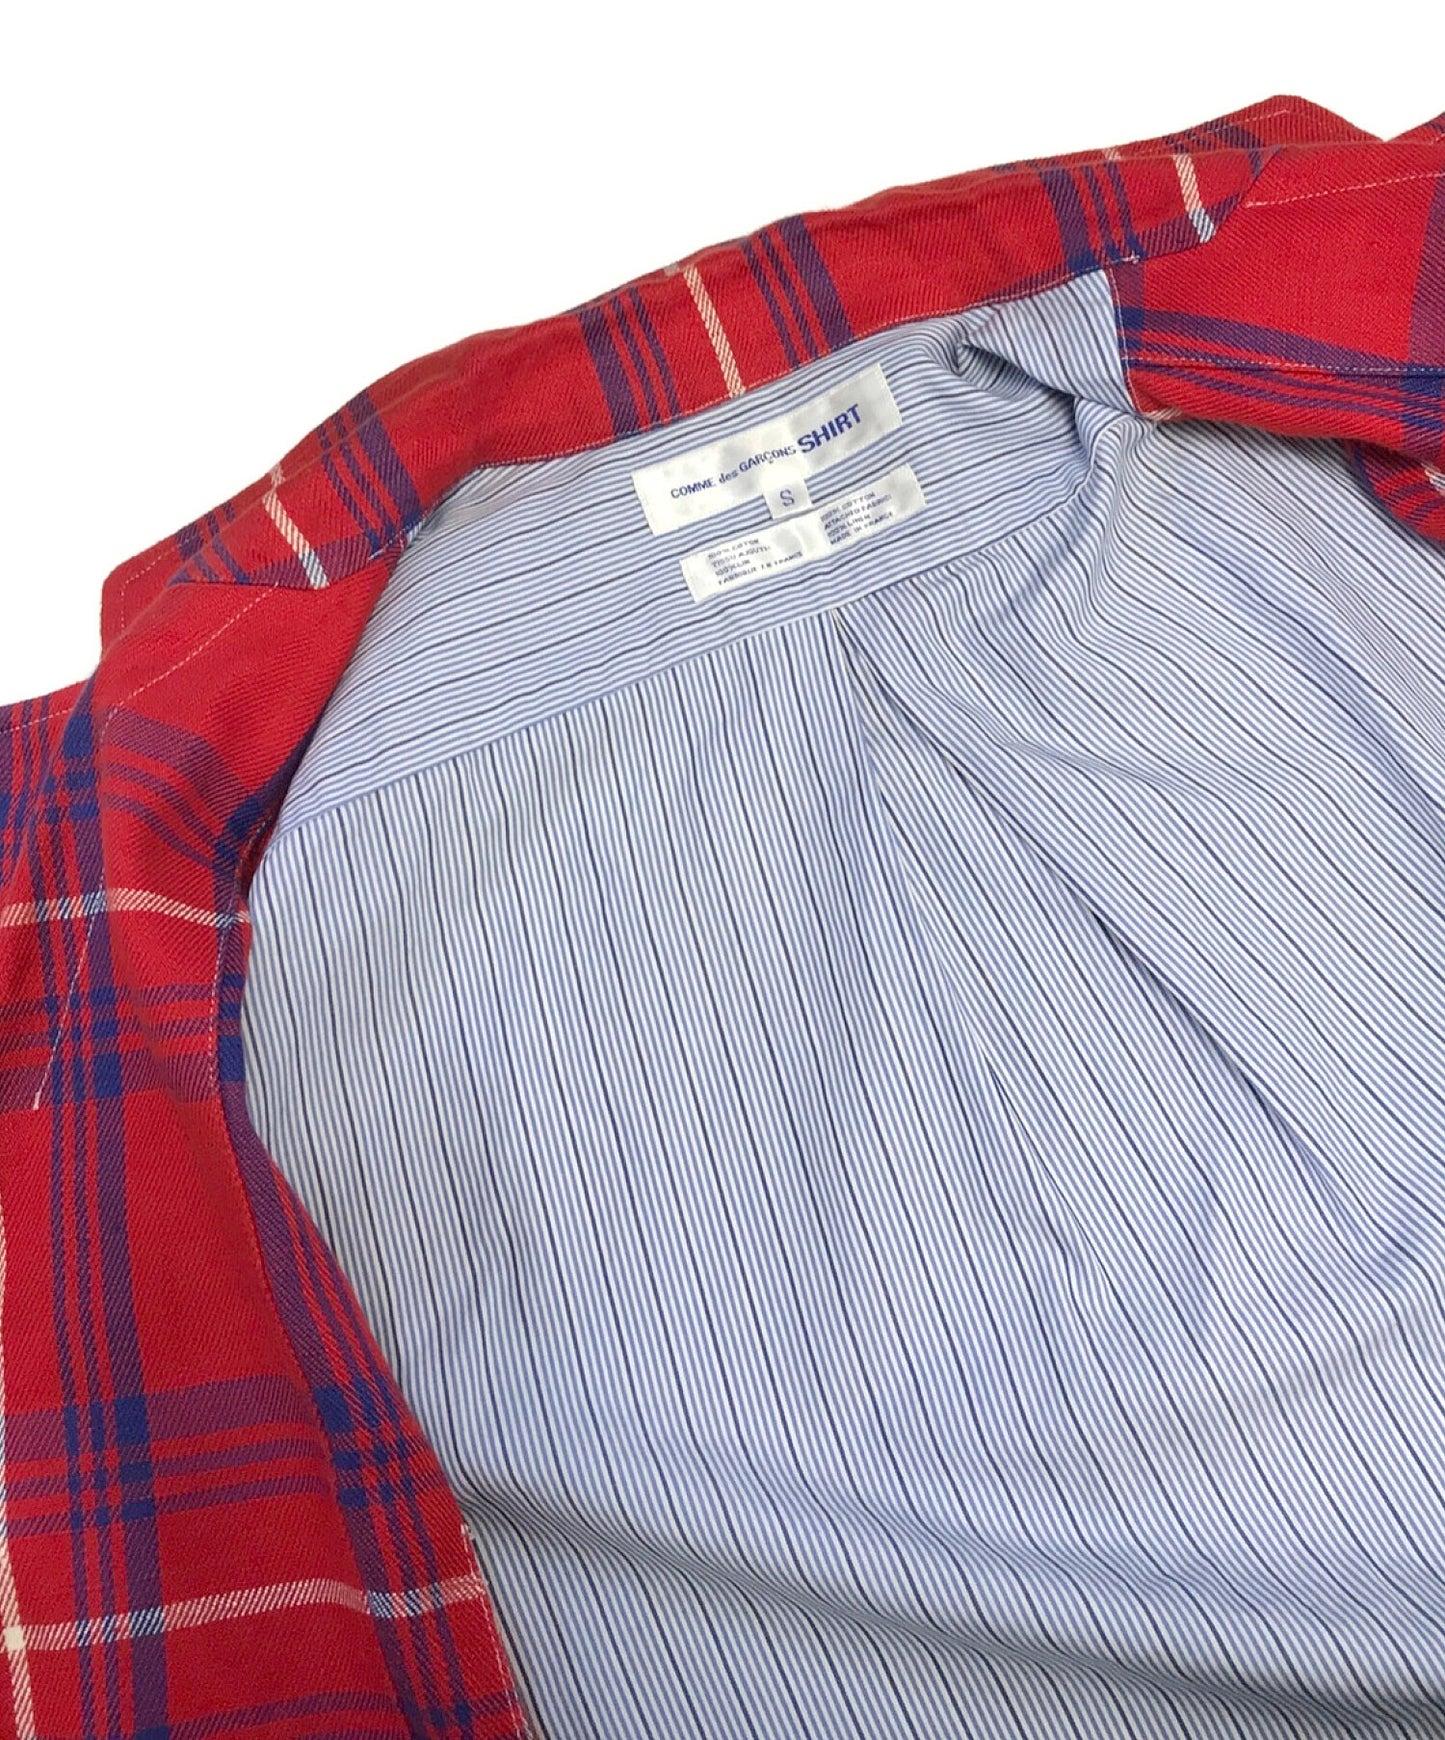 [Pre-owned] COMME des GARCONS SHIRT 00's Front Checked Striped Shirt Jacket S10162